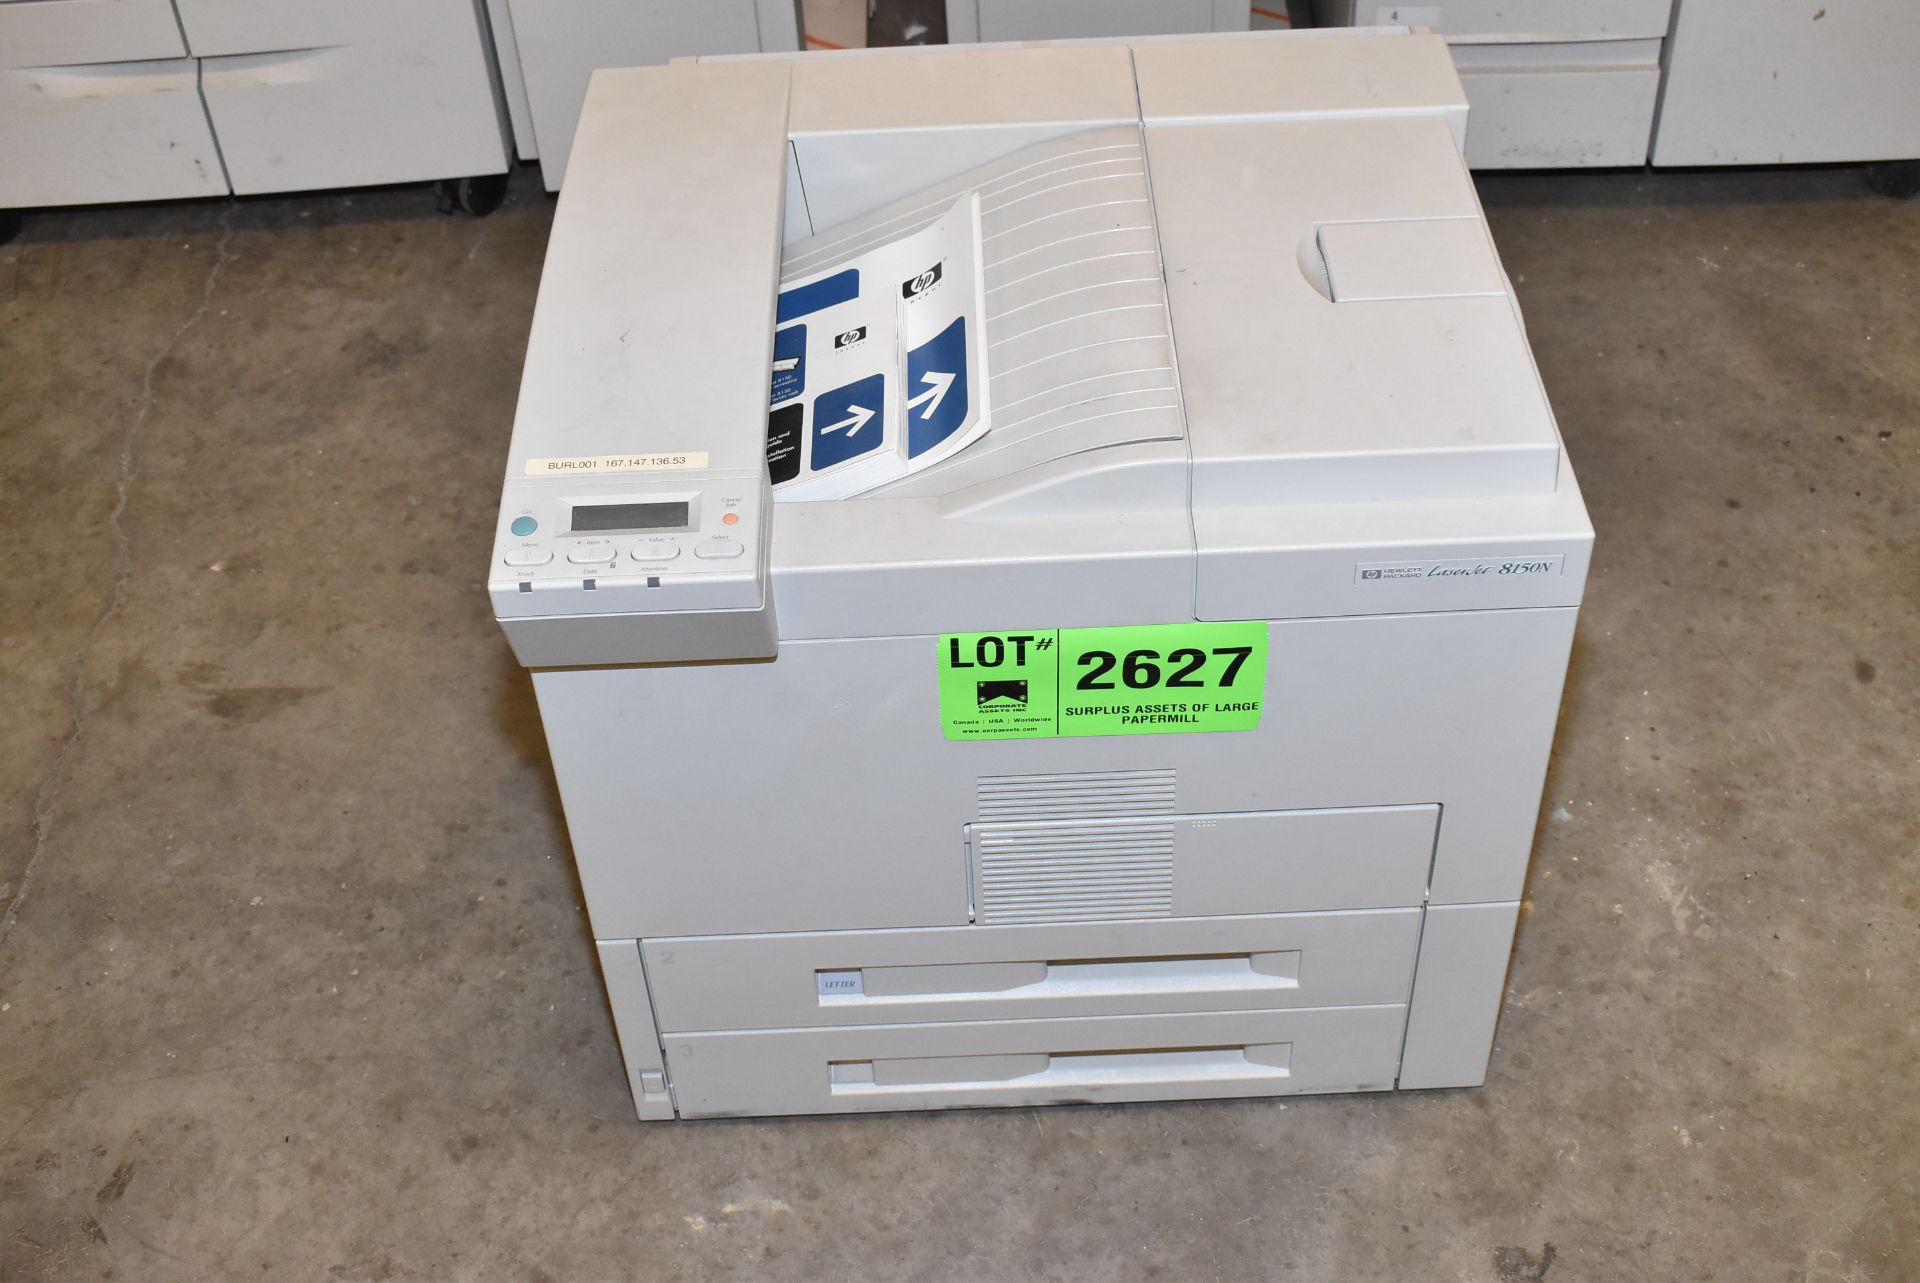 HP LASERJET 8150N LASER PRINTER [RIGGING FEE FOR LOT #2627 - $TBD USD PLUS APPLICABLE TAXES]